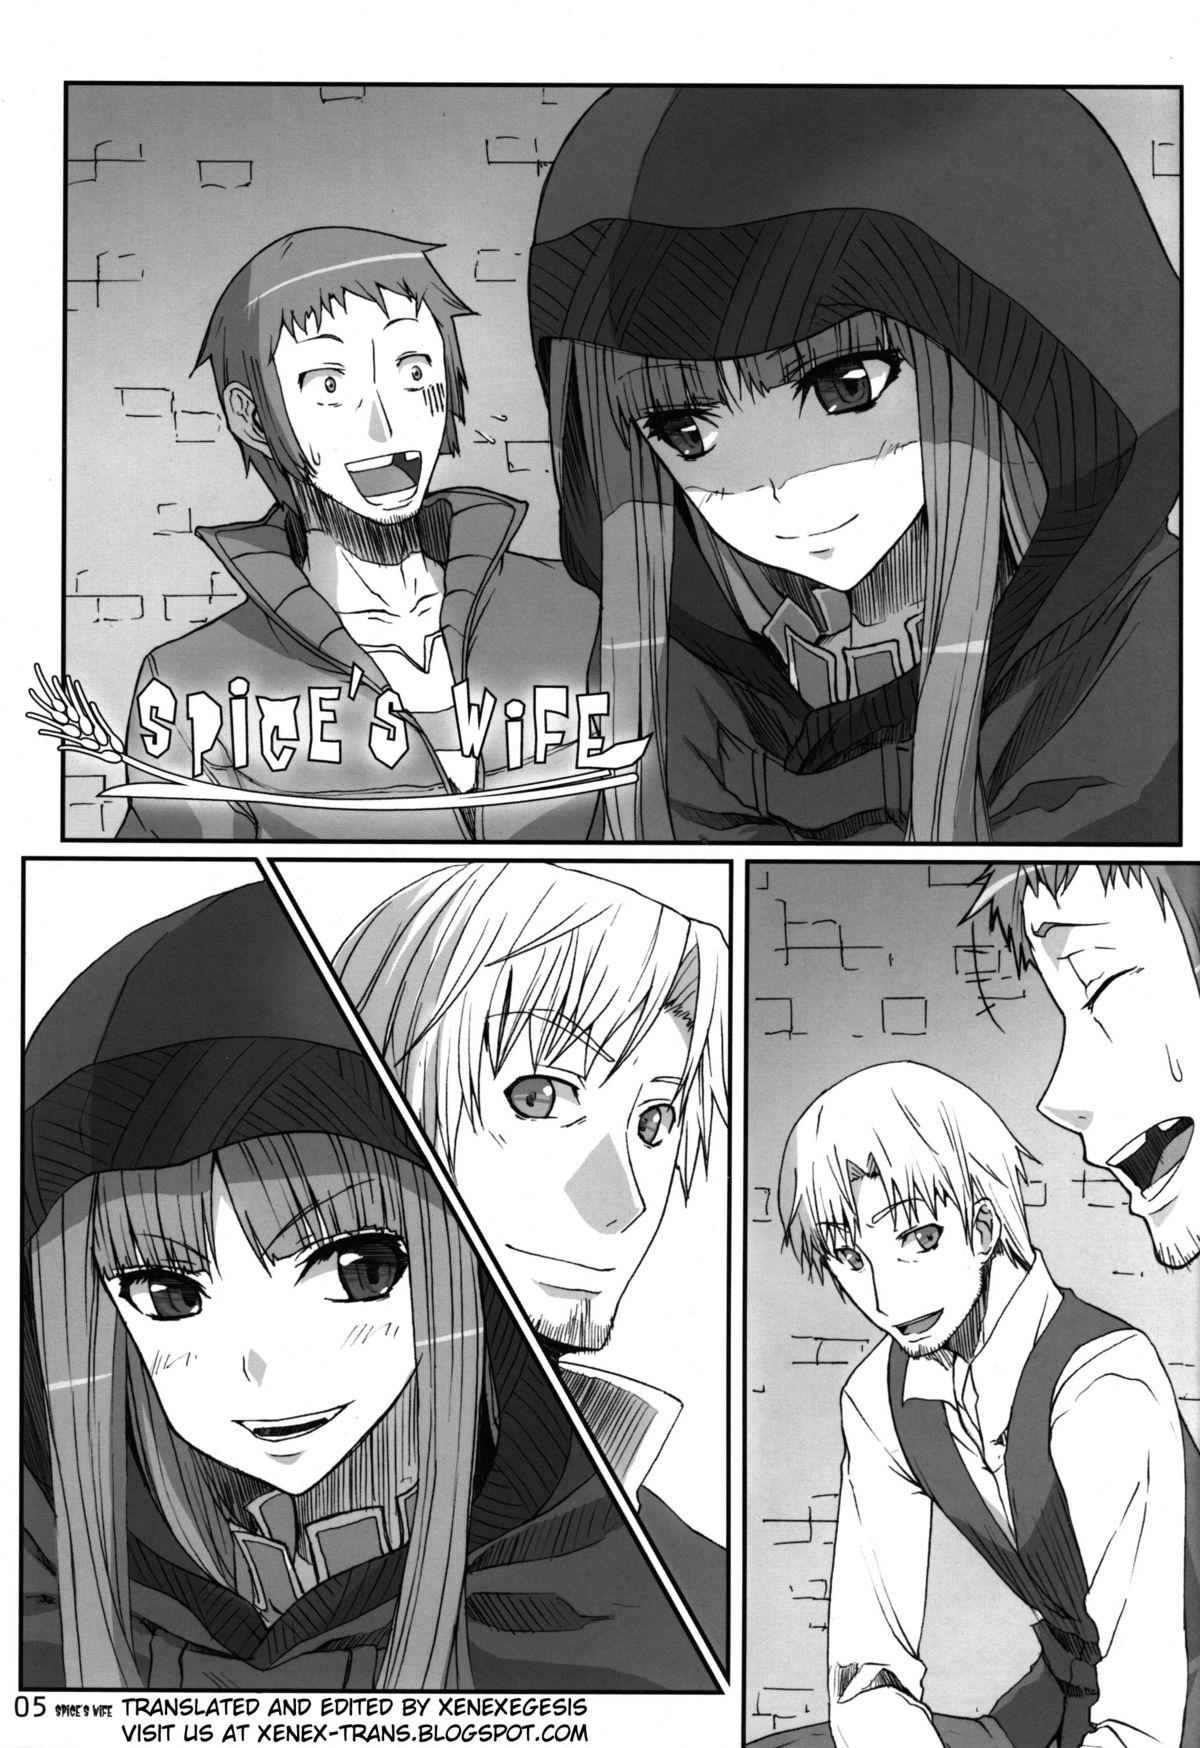 Funk SPiCE'S WiFE - Spice and wolf Baile - Page 5